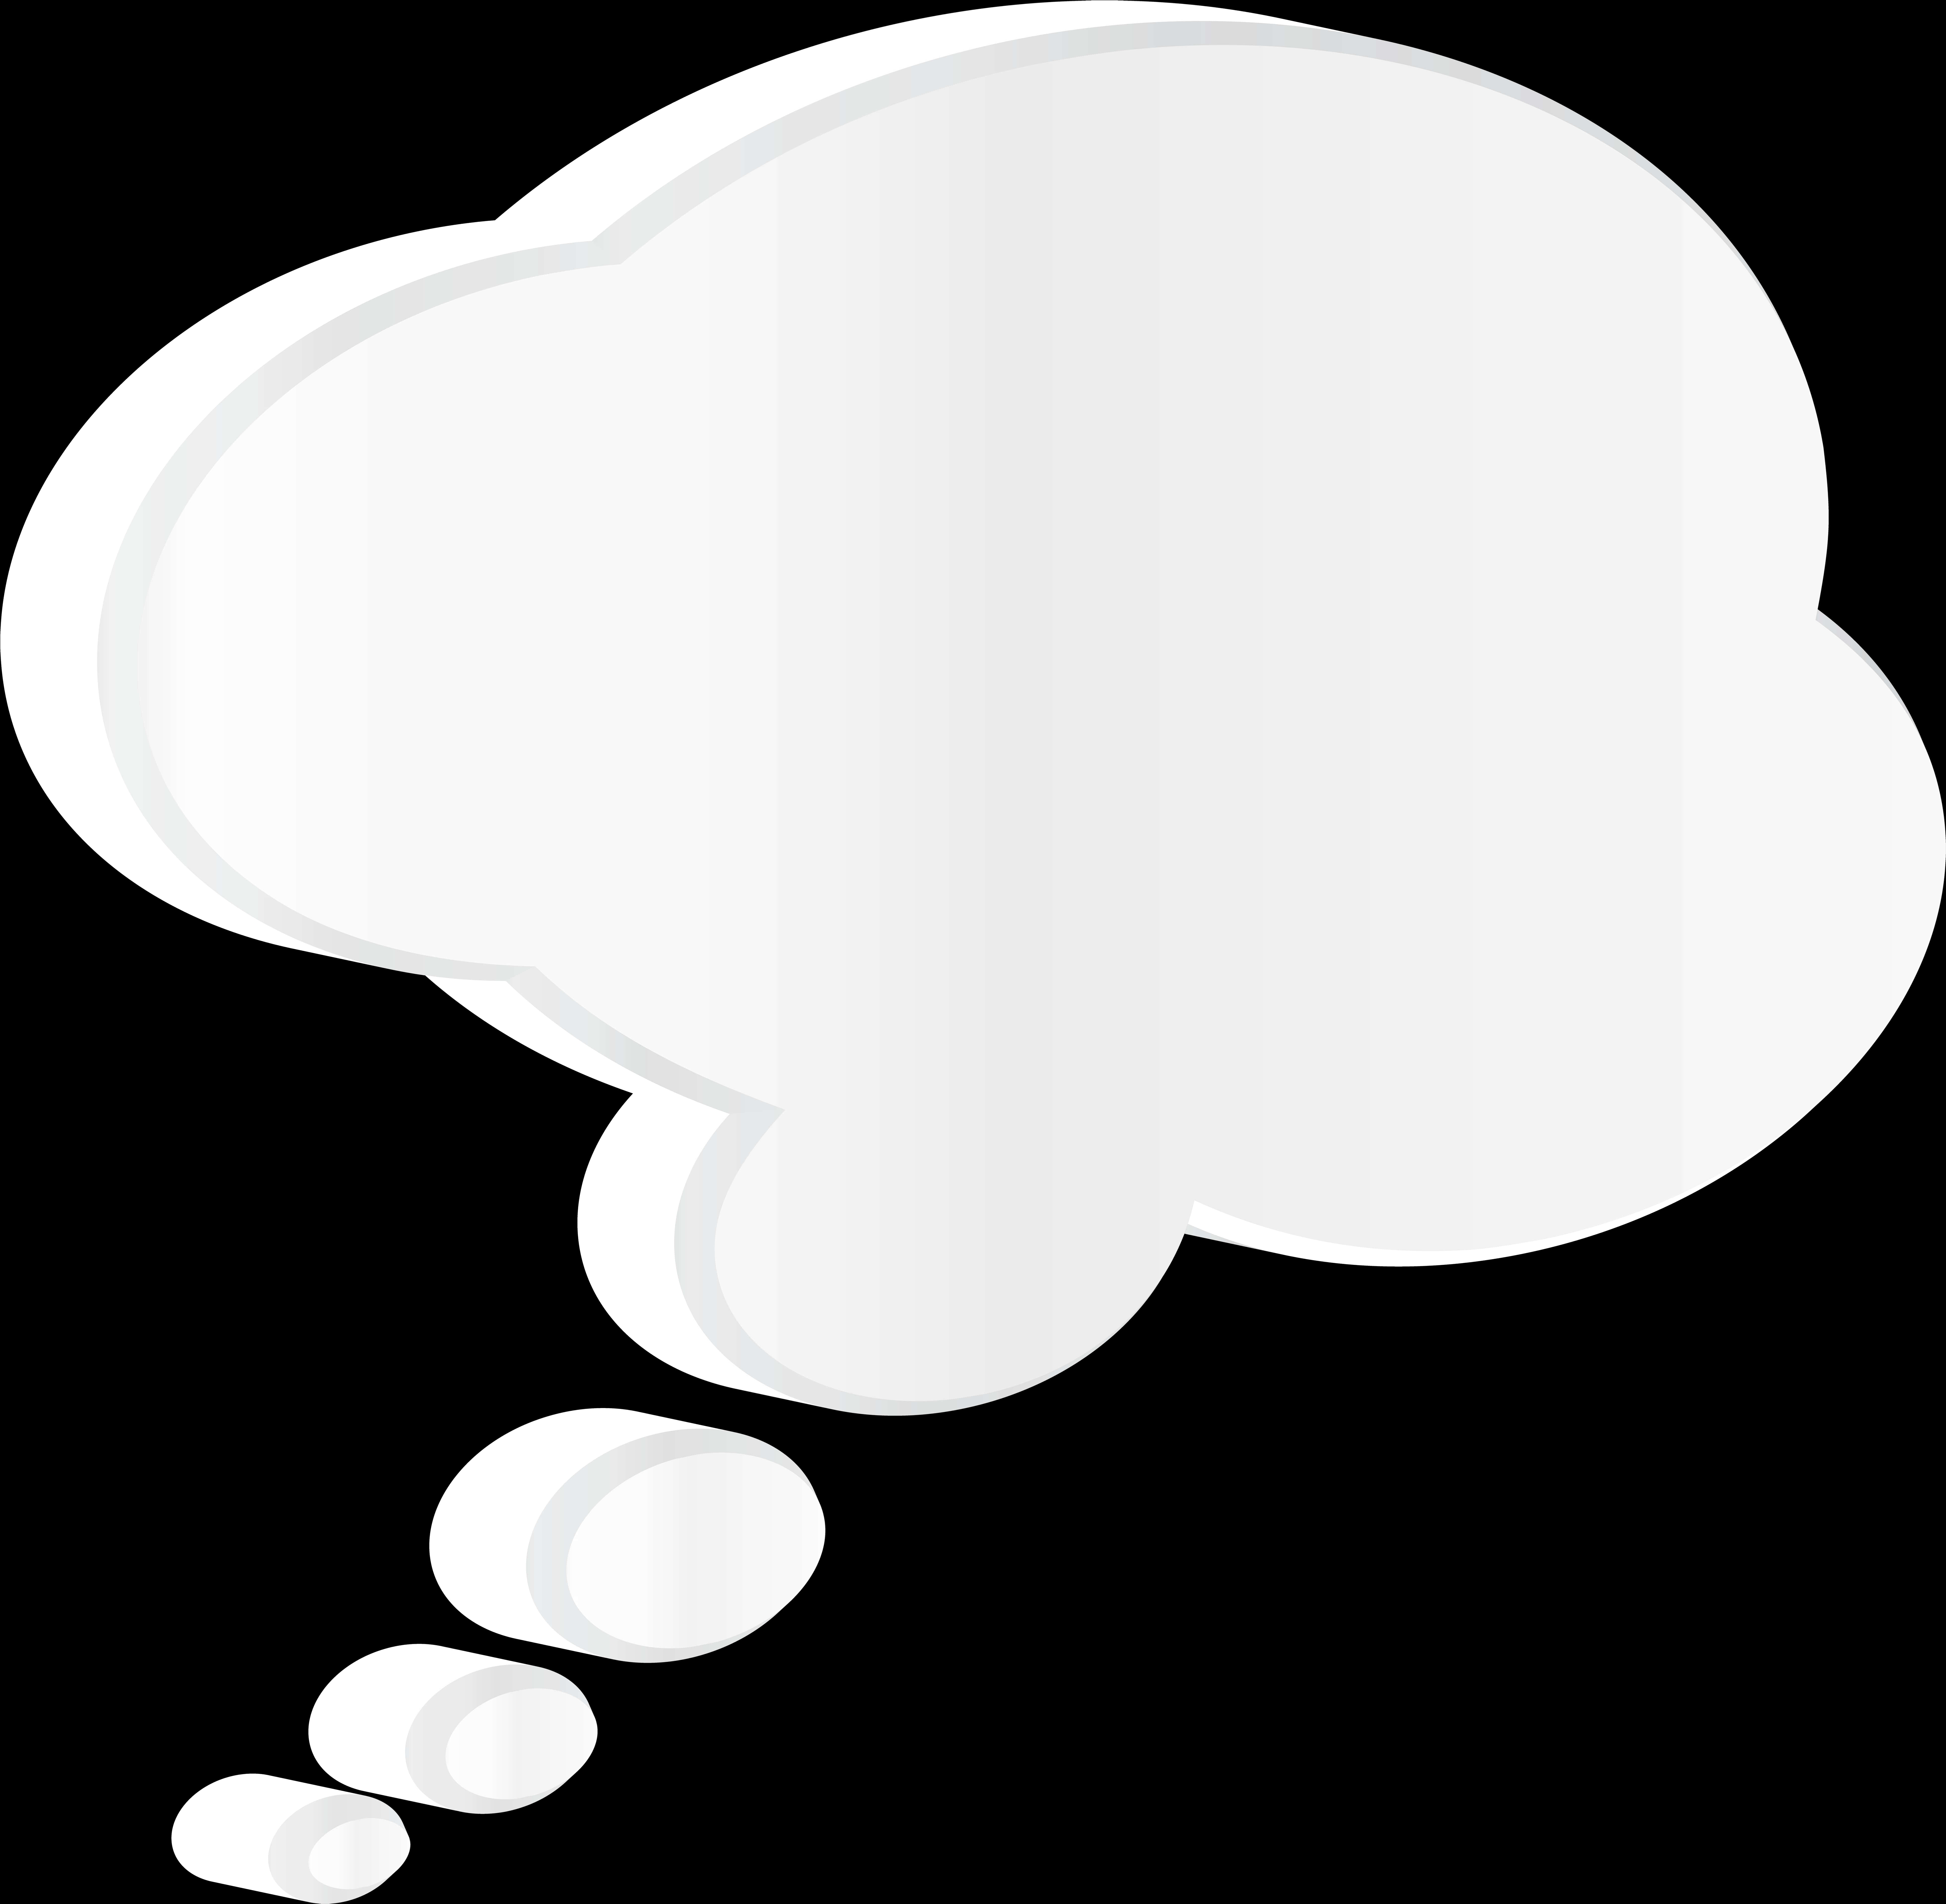 A White Thought Bubble On A Black Background